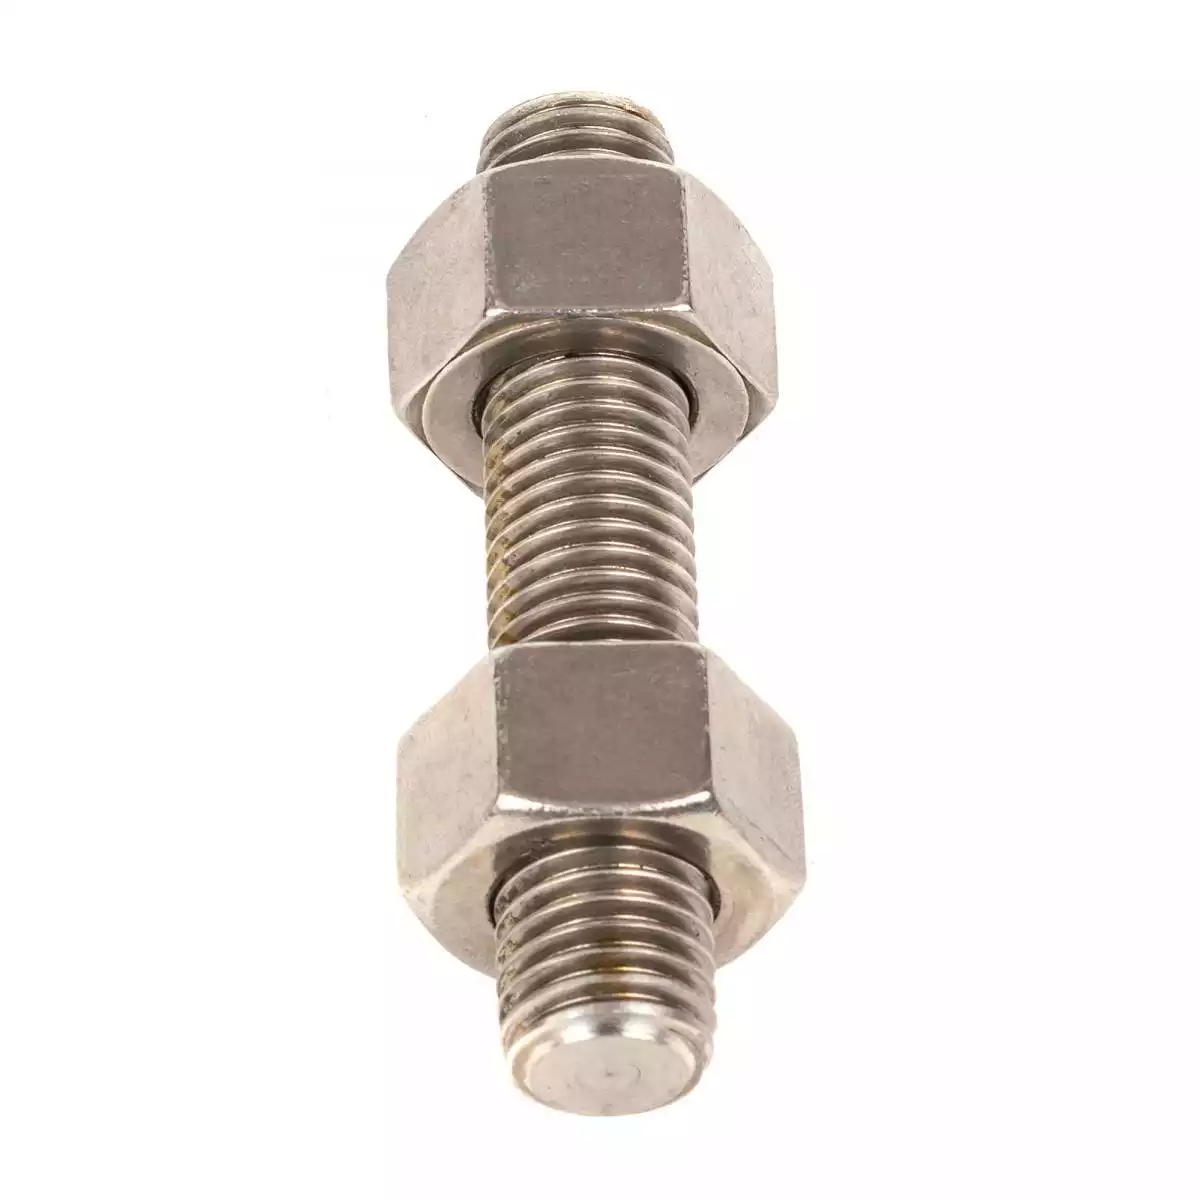 ASTM A320 Stud Bolt,1 Inch, 8UNC, for Low Temperature Piping